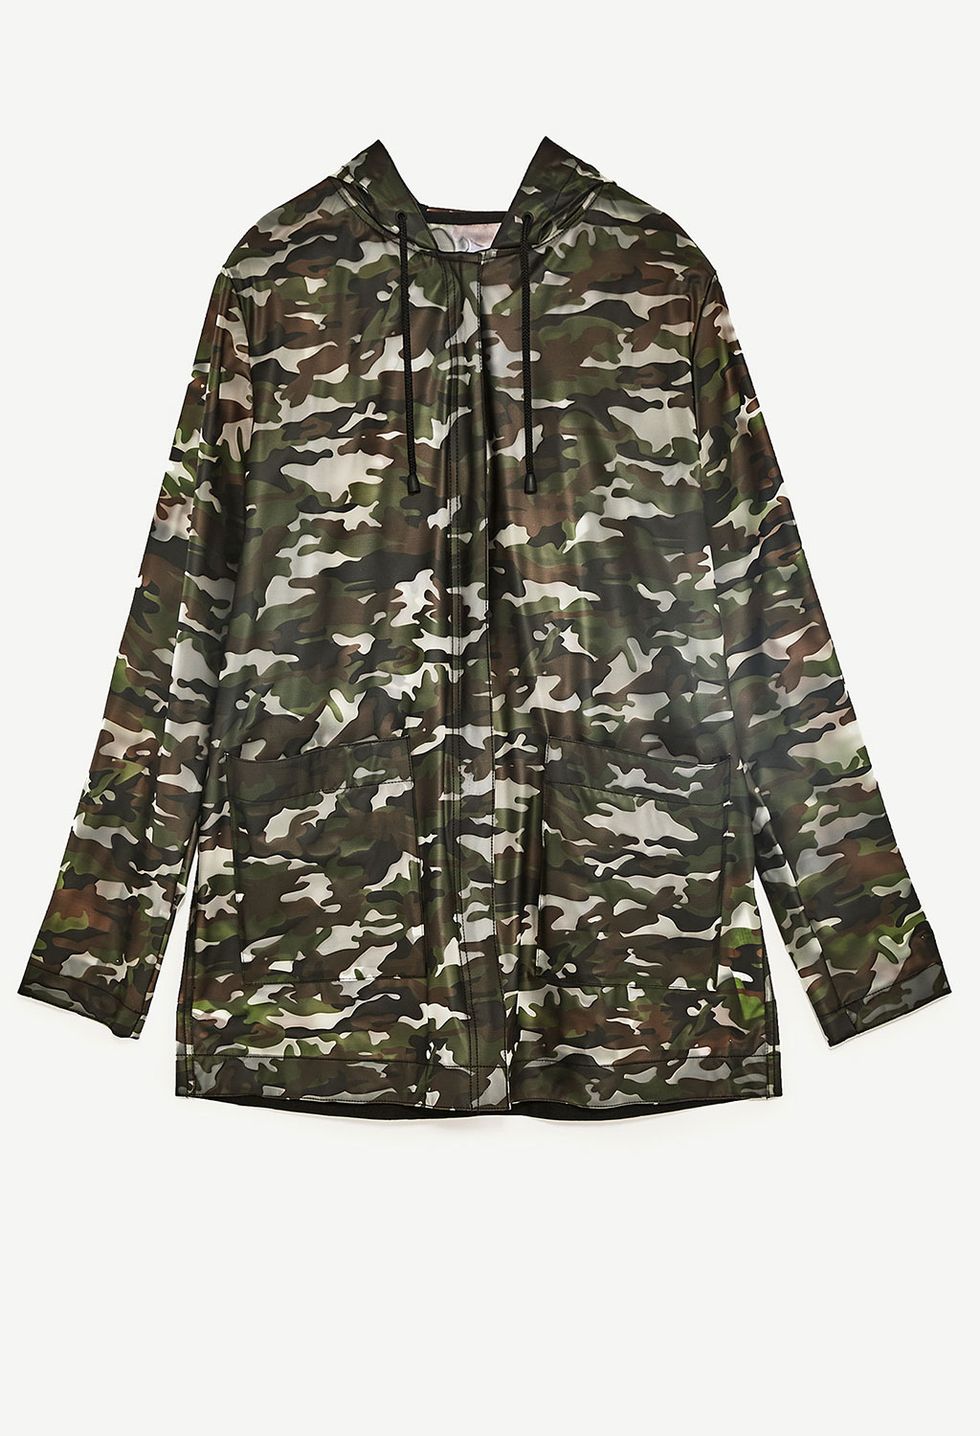 Clothing, Sleeve, Outerwear, Camouflage, Jacket, Military camouflage, Pattern, Collar, Blouse, Top, 